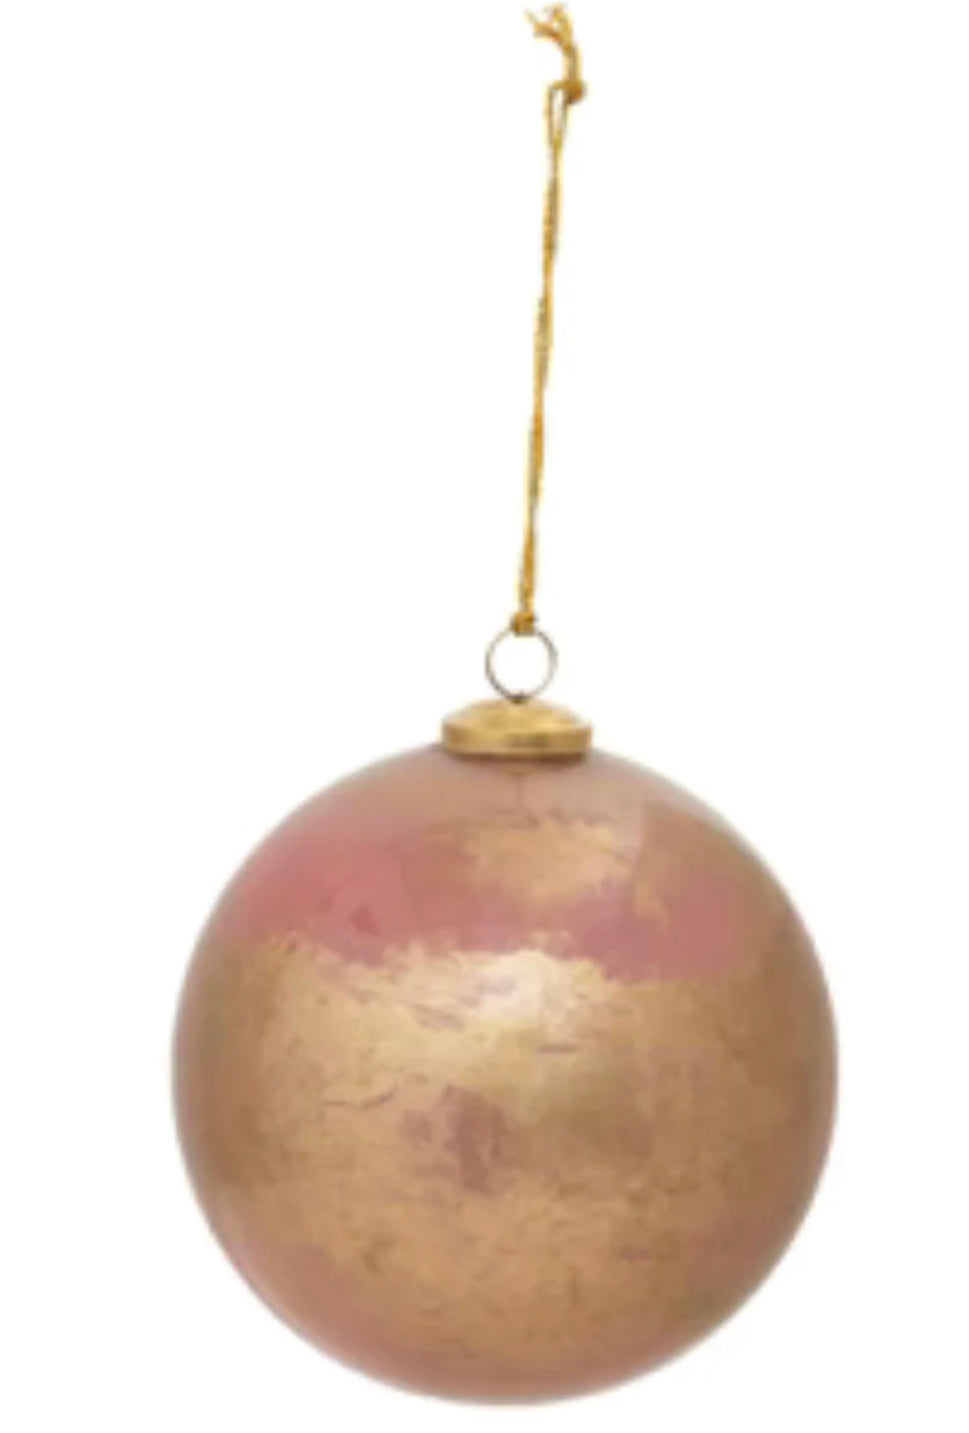 Glass Ball Ornament, Marbled Pink and Gold Finish